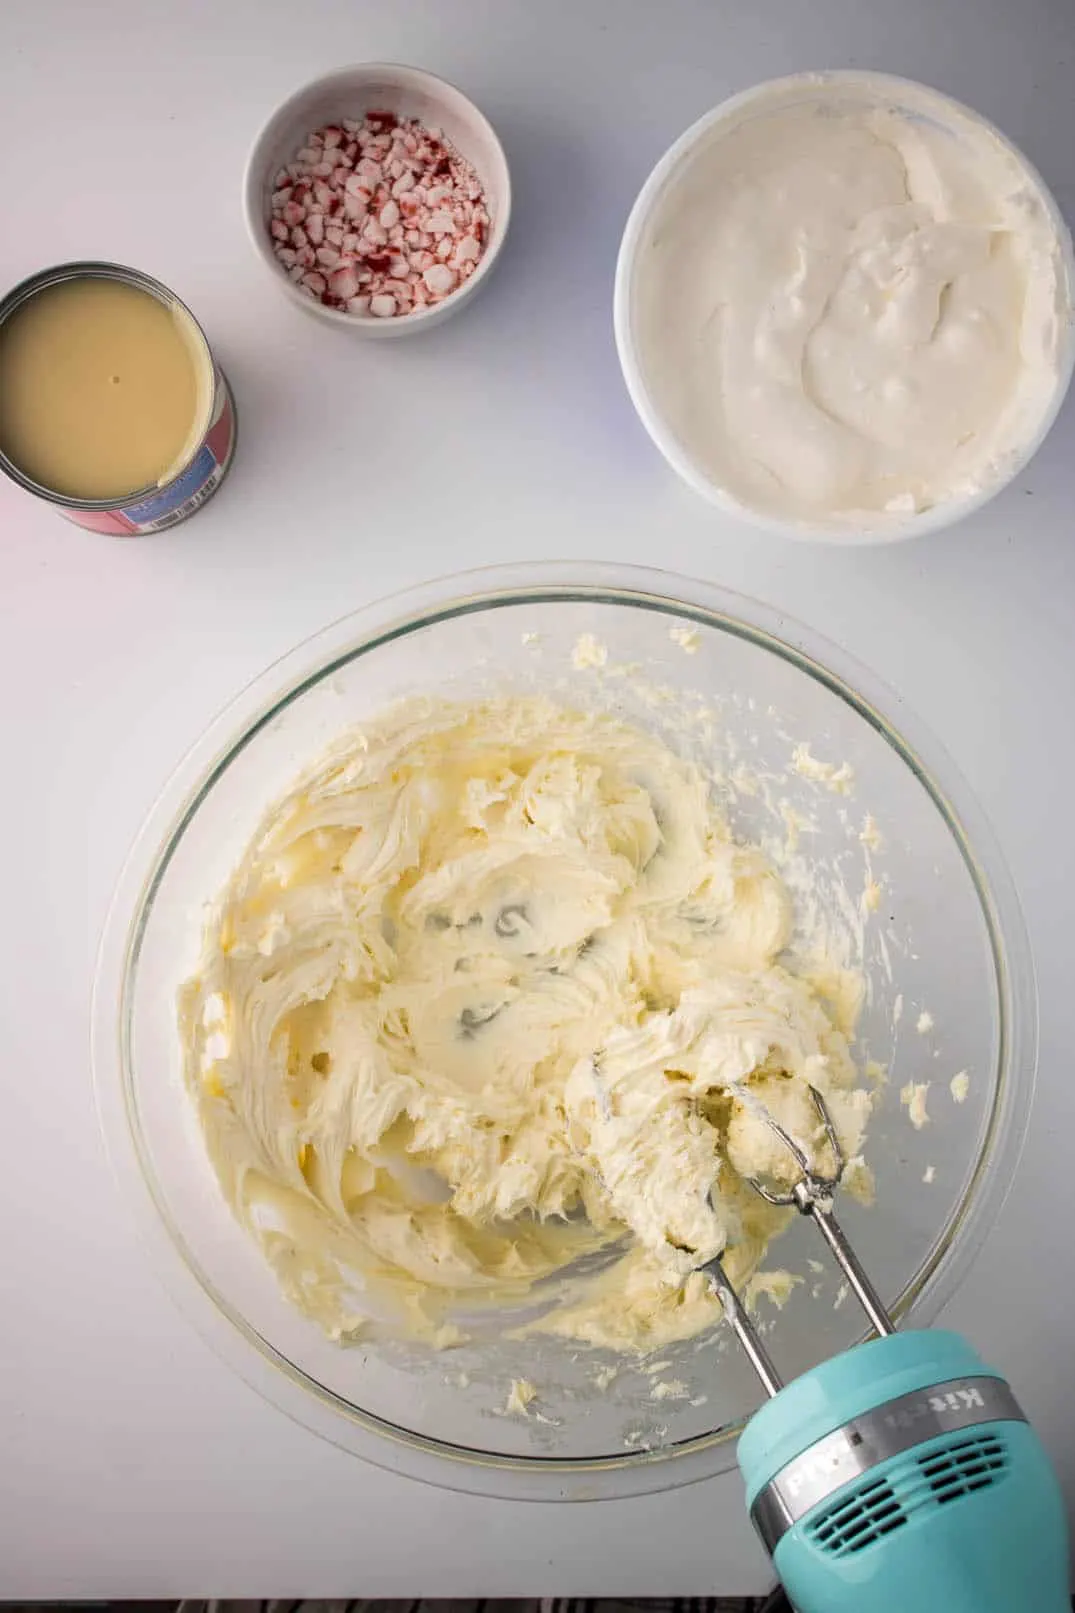 Mixing softened cream cheese and cookie sandwich fillings in a glass bowl with the help of an electric mixer. The bowl is surrounded by additional ingredients to make No-Bake Peppermint Cheesecake Jars.